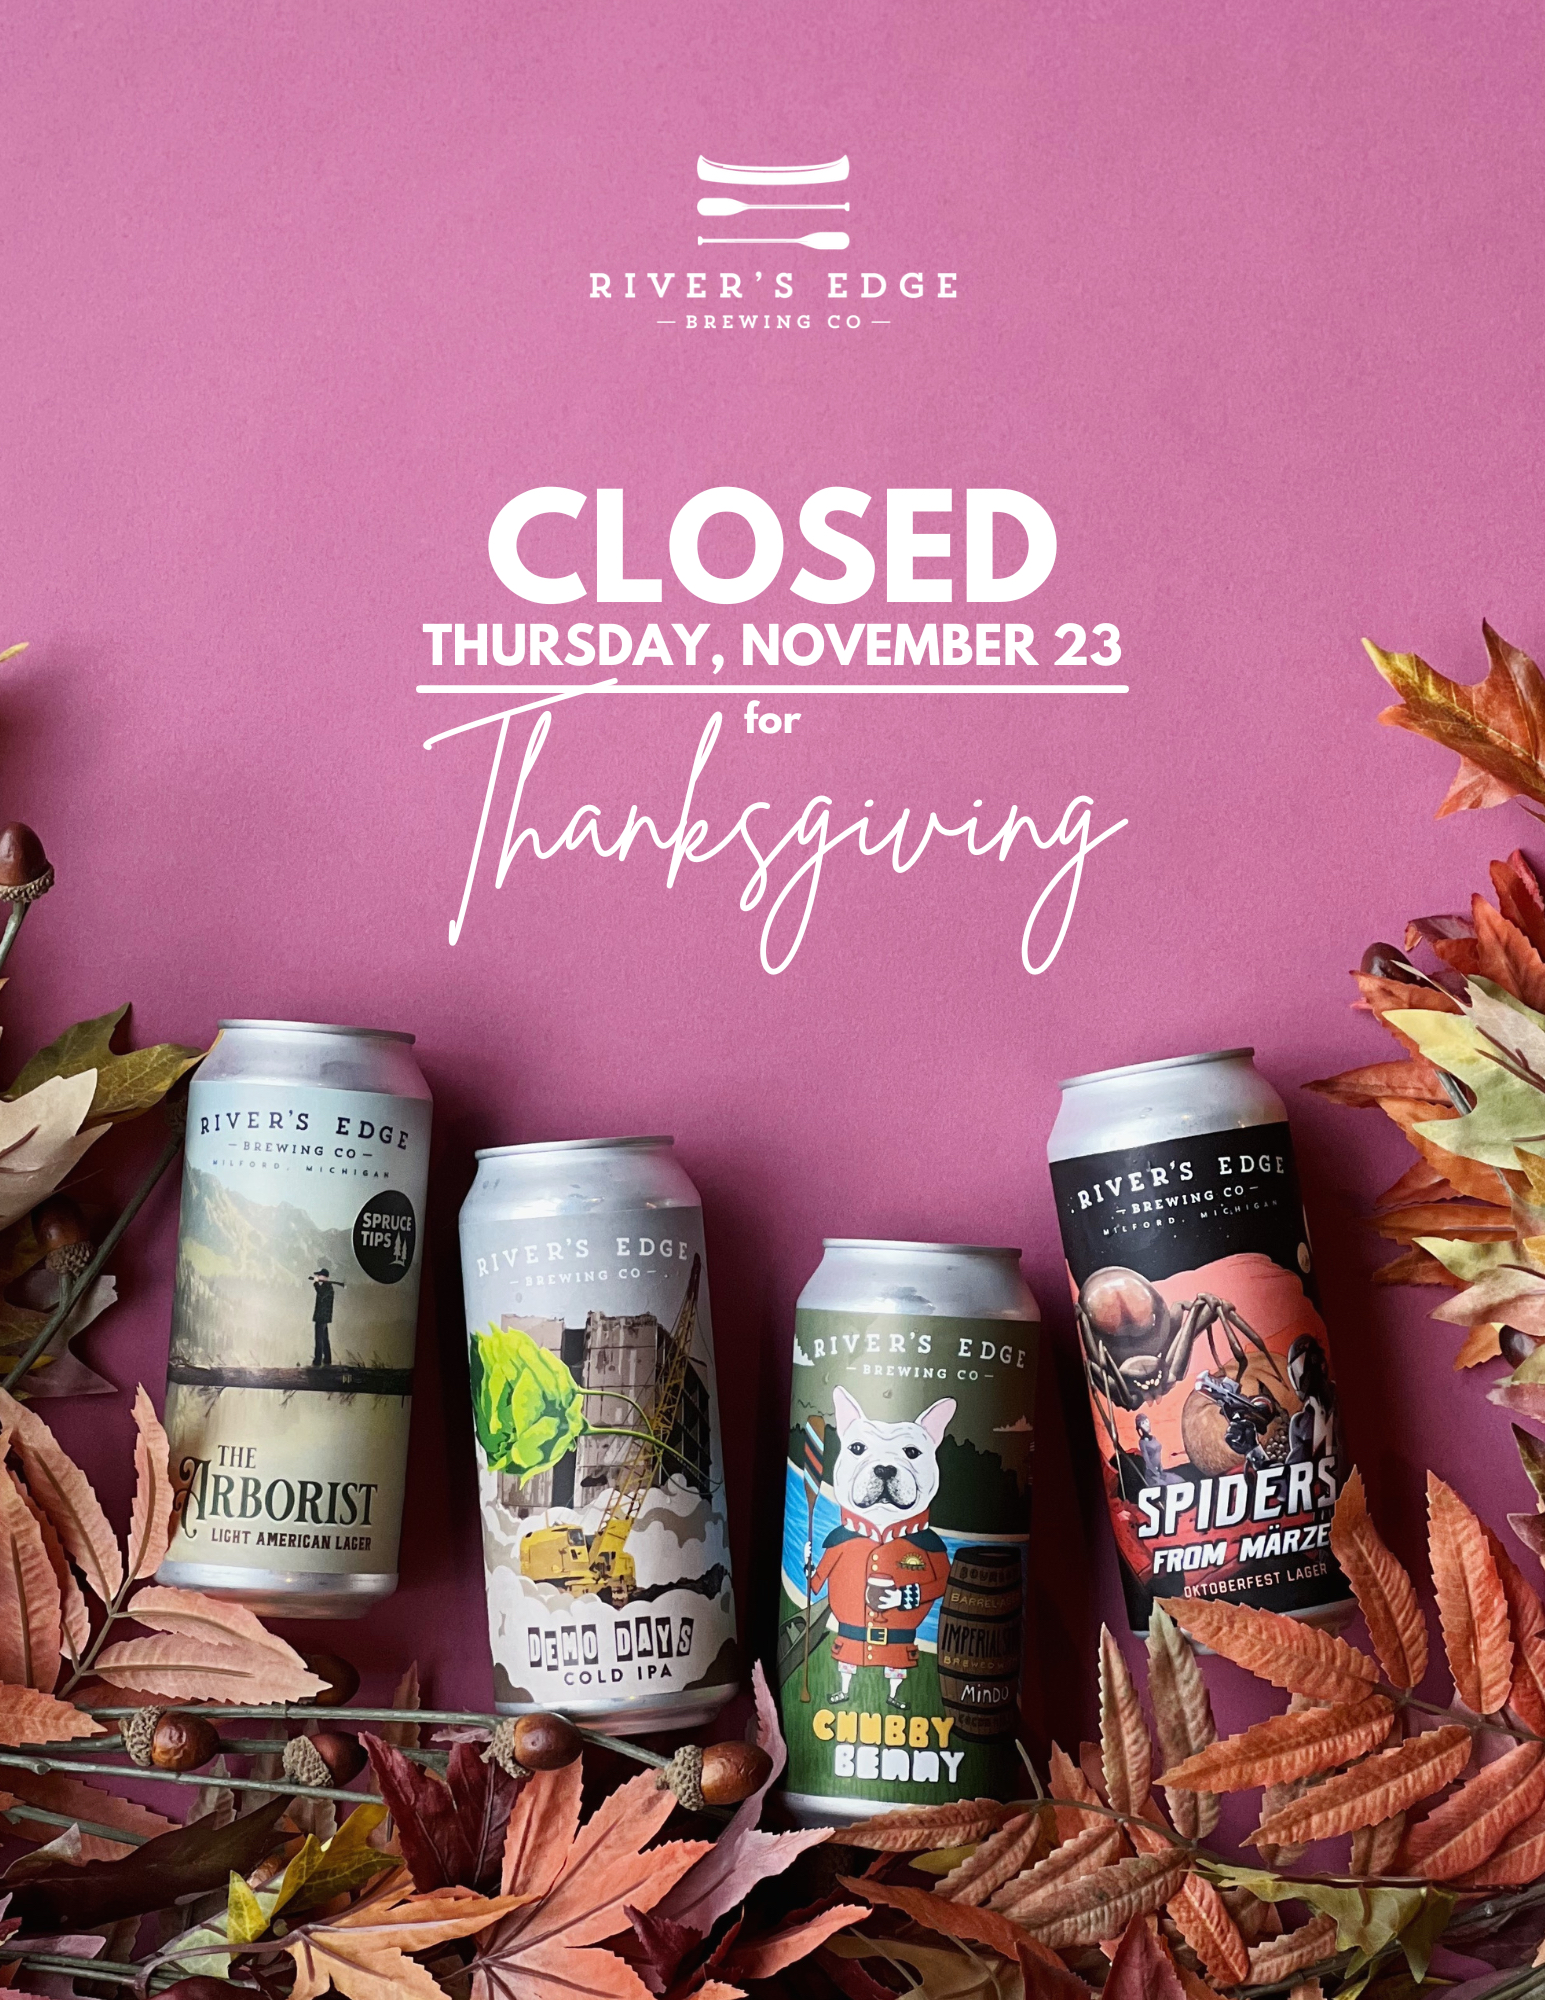 A photo of River's Edge beer cans with autumn leaves and the message that the Taproom is closed on Thanksgiving.